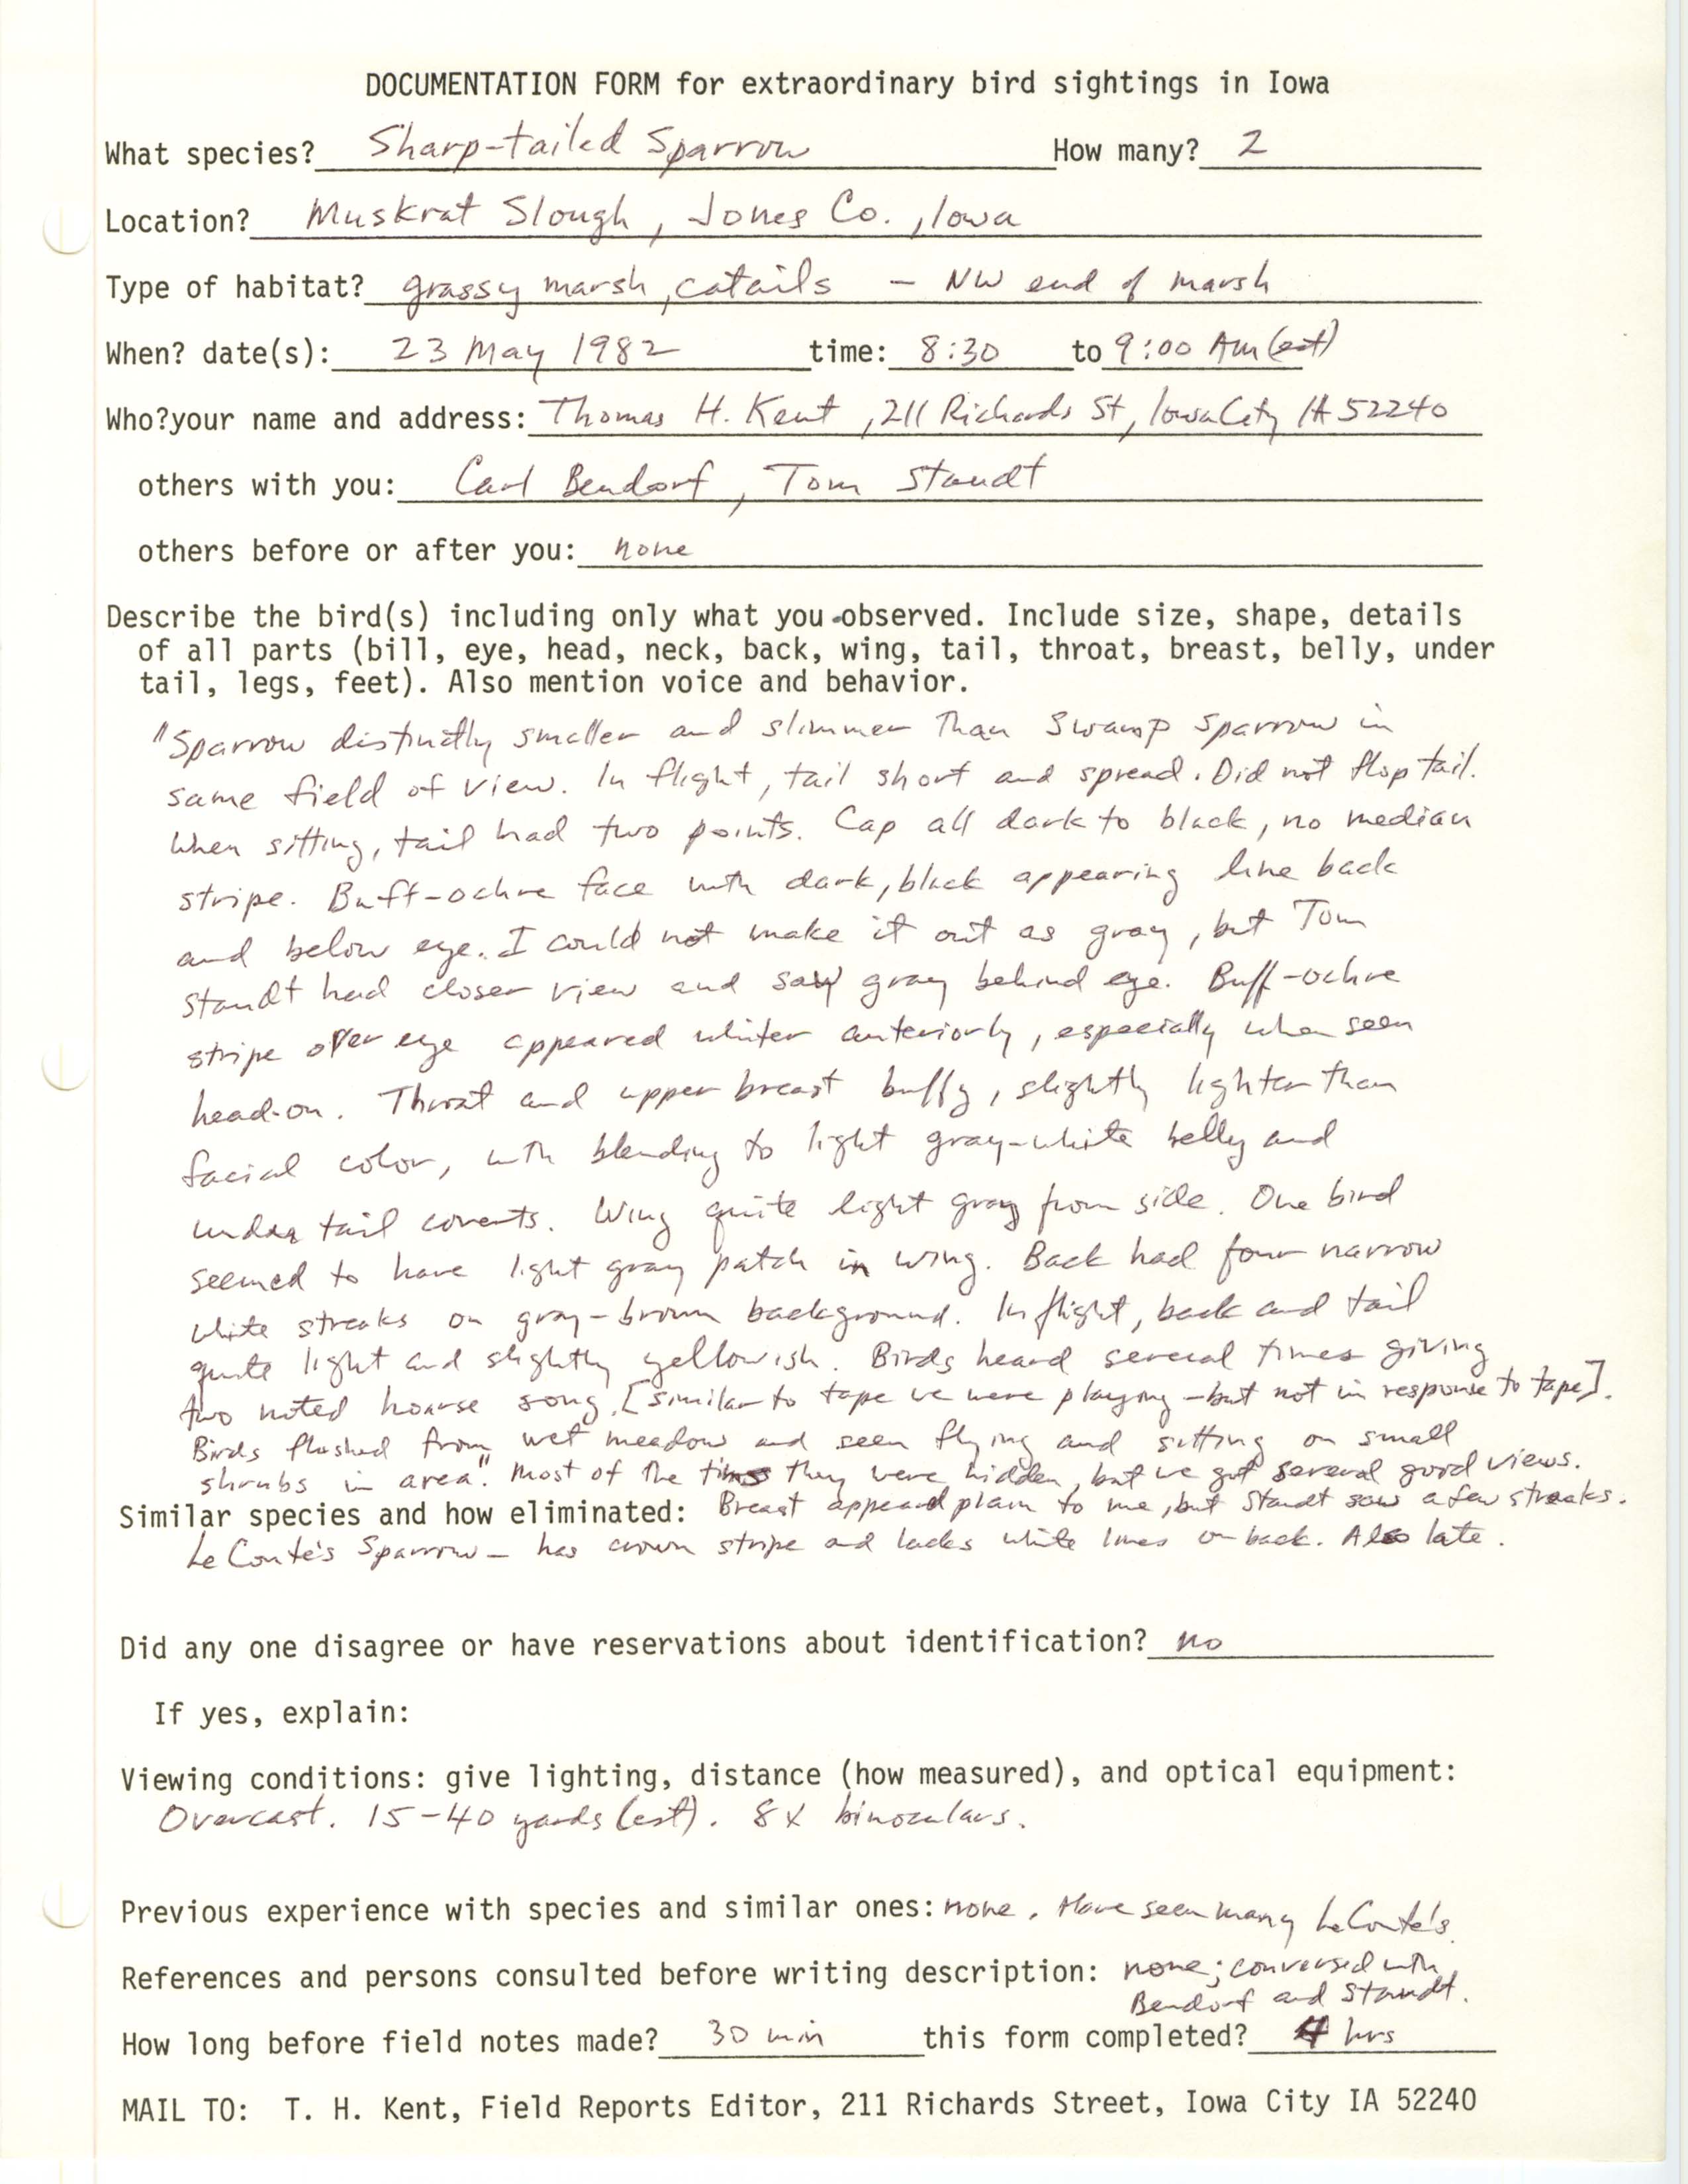 Rare bird documentation form for Sharp-tailed Sparrow at Muskrat Slough, 1982